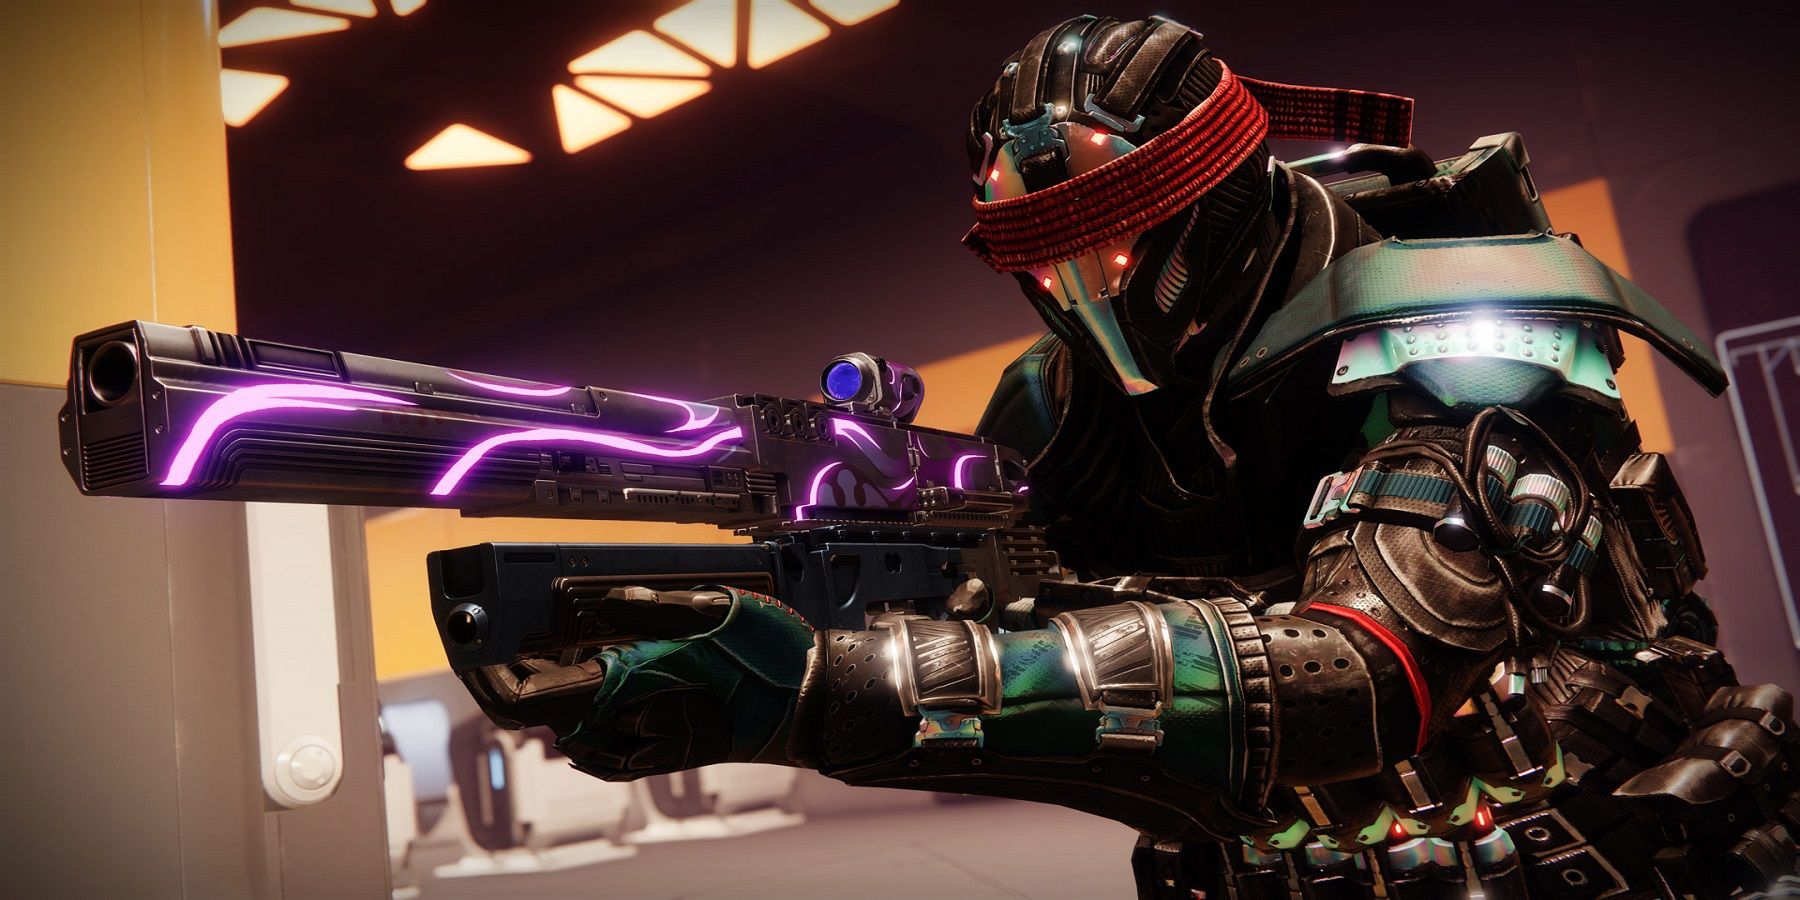 Destiny 2's Light subclasses are getting some fragments reworks and new fragments inside of Lightfall.